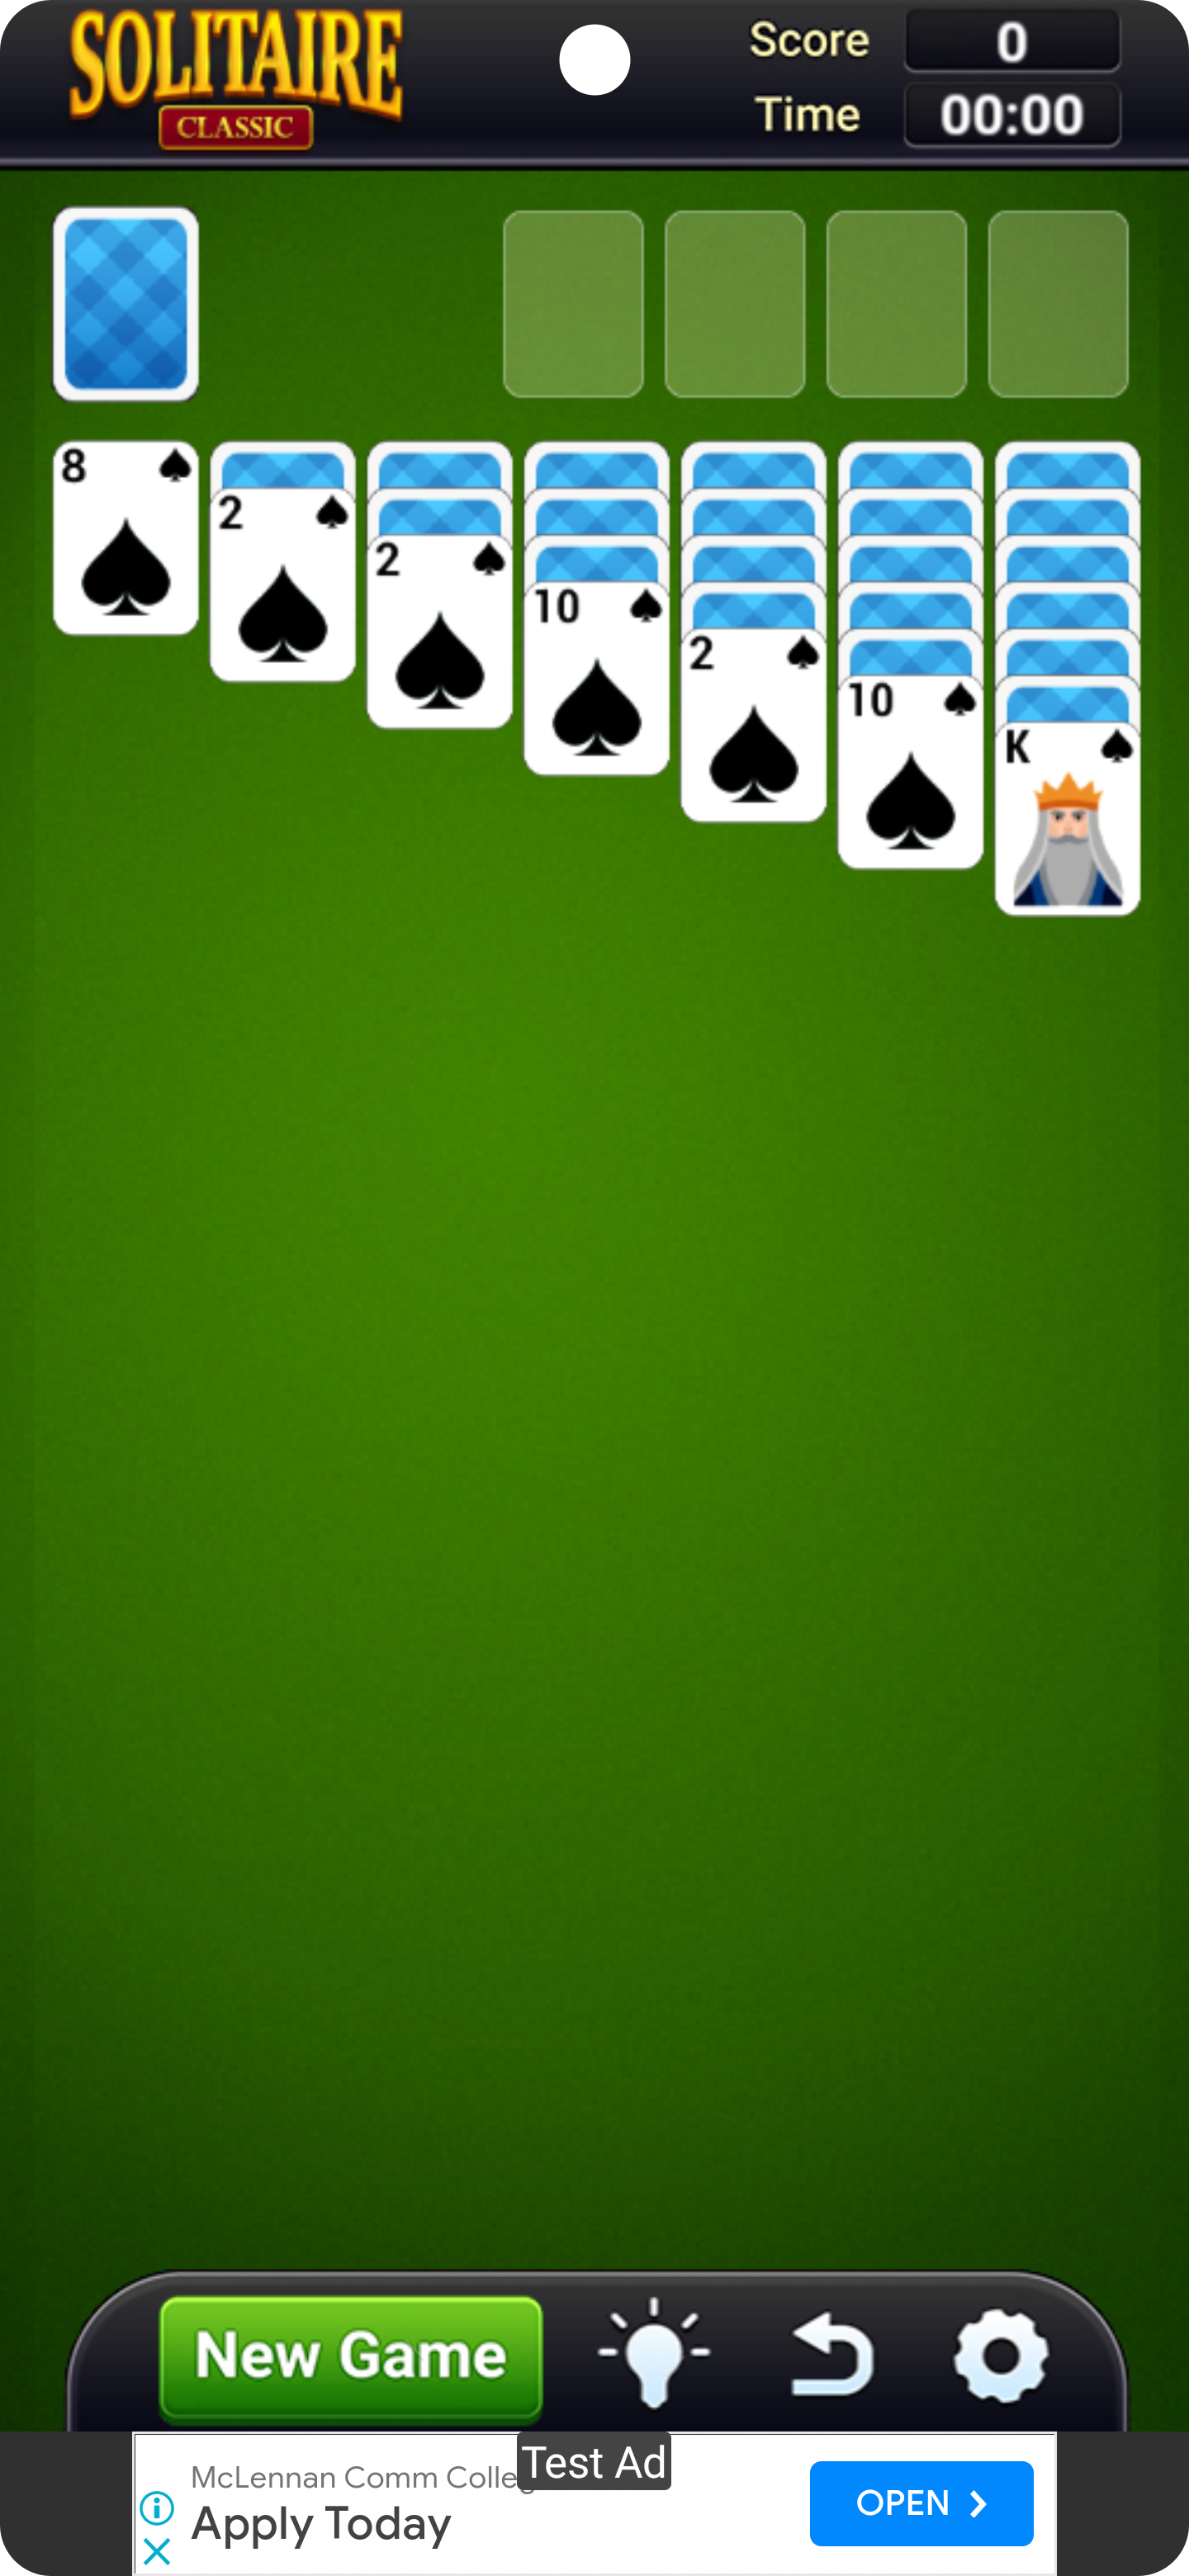 Solitaire Online Card Games mobile android iOS apk download for